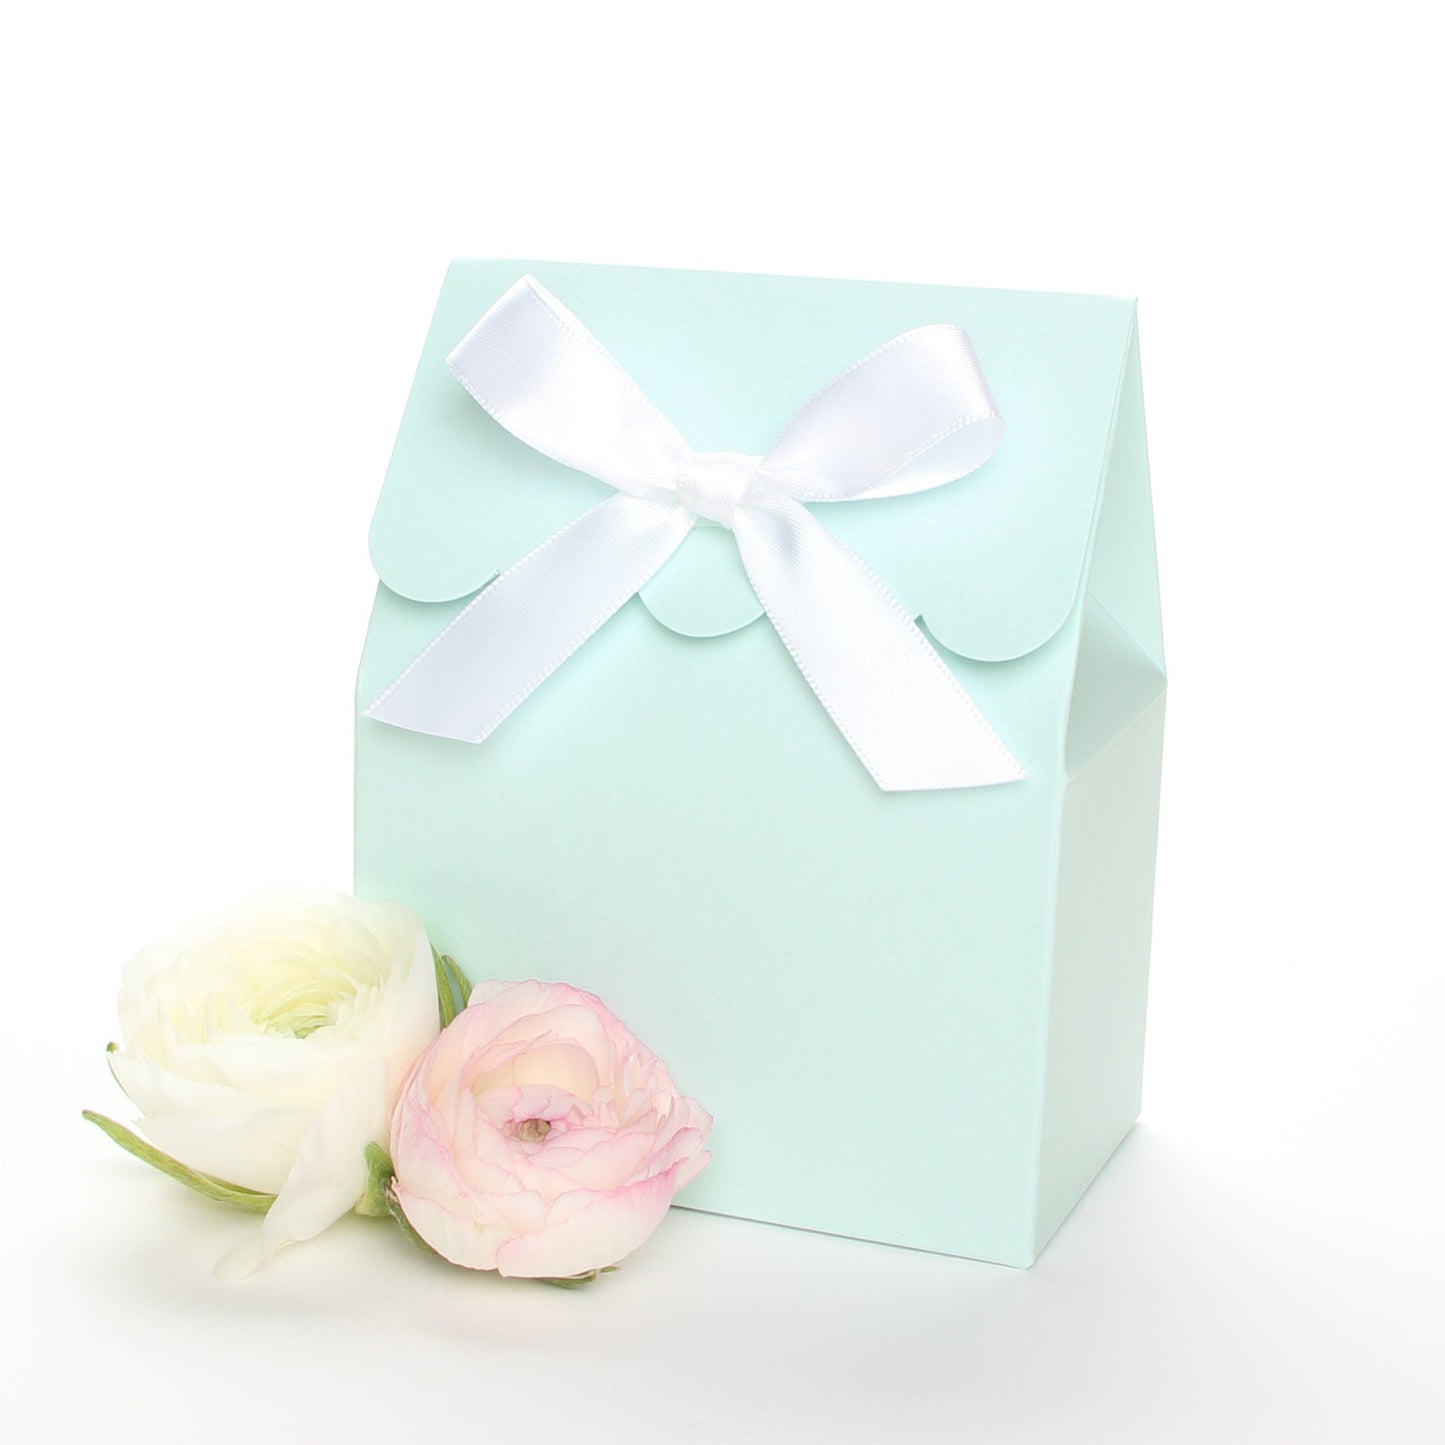 Lux Party’s light blue favor box with a scalloped edge and a white satin bow next to pink and white ranunculus flowers.